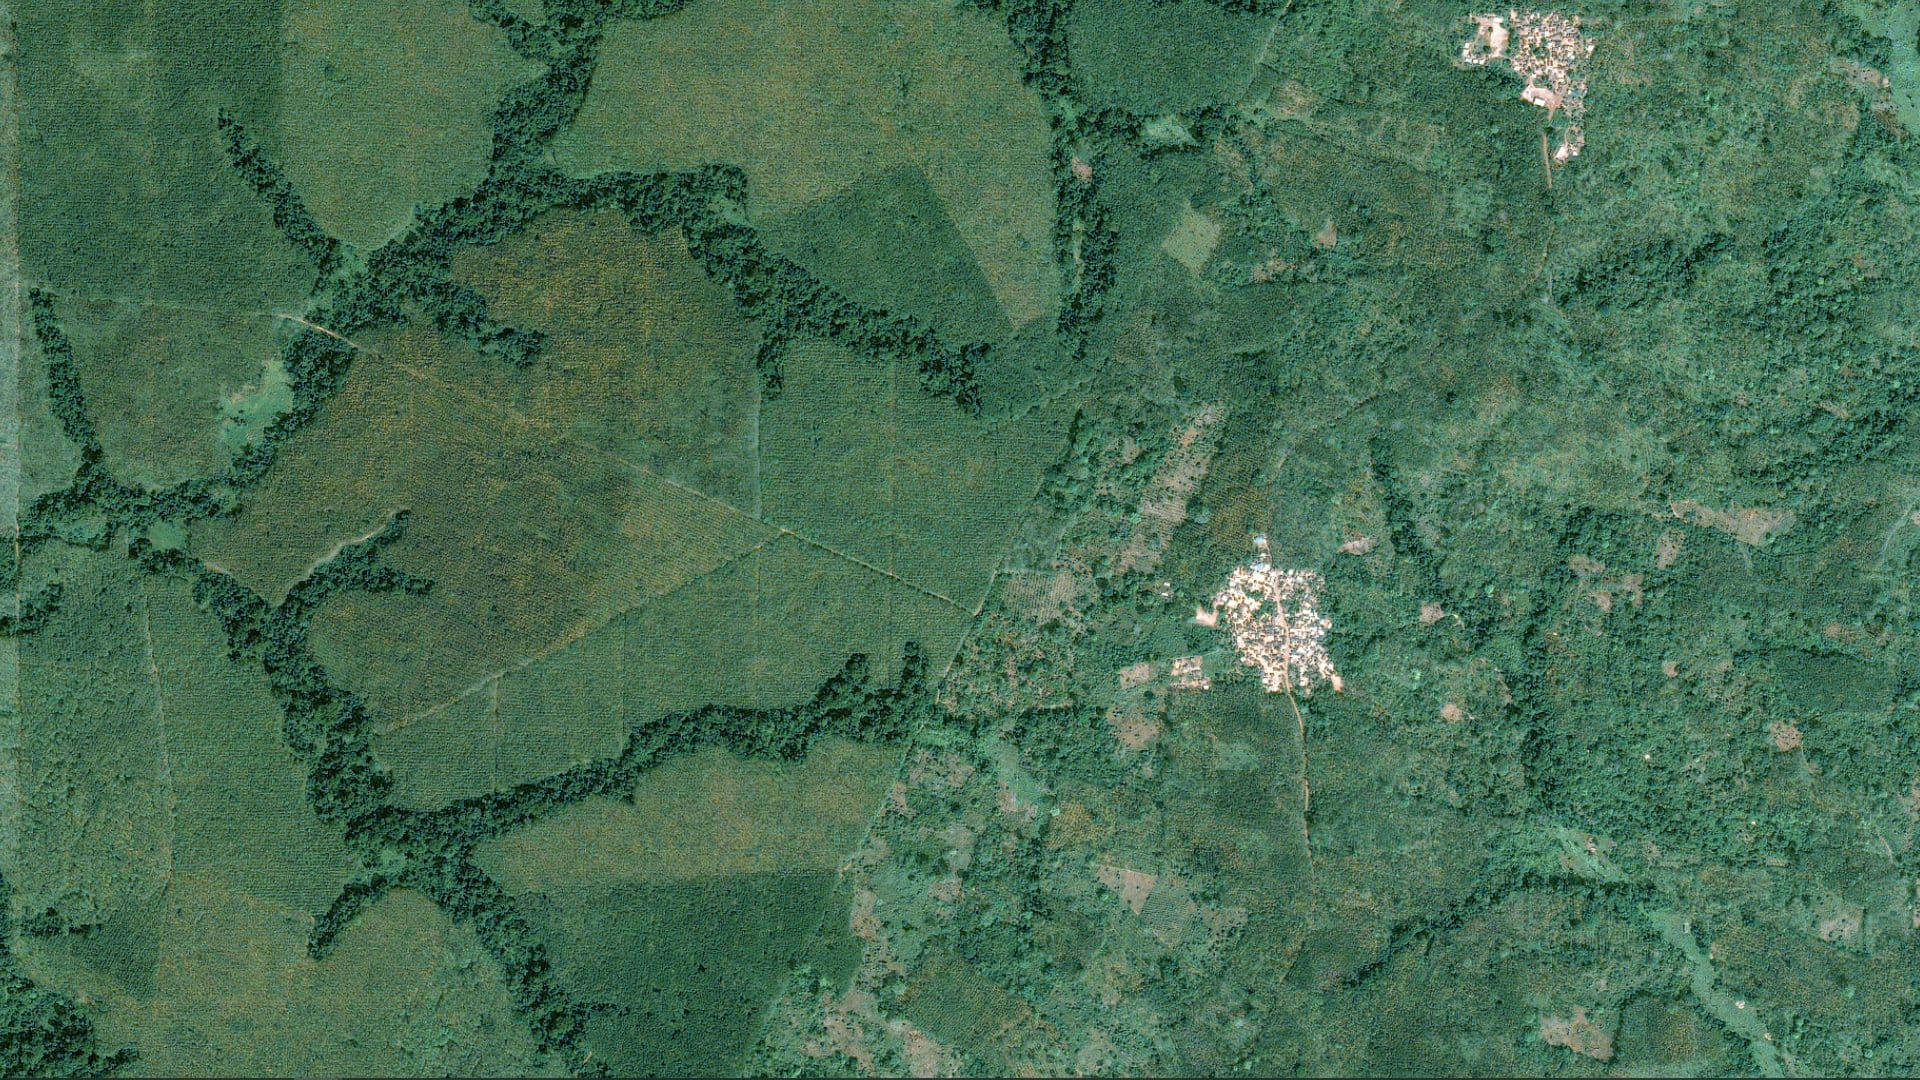 SPOT, 1,5m resolution satellite imagery- Cavally Forest, Ivory Coast